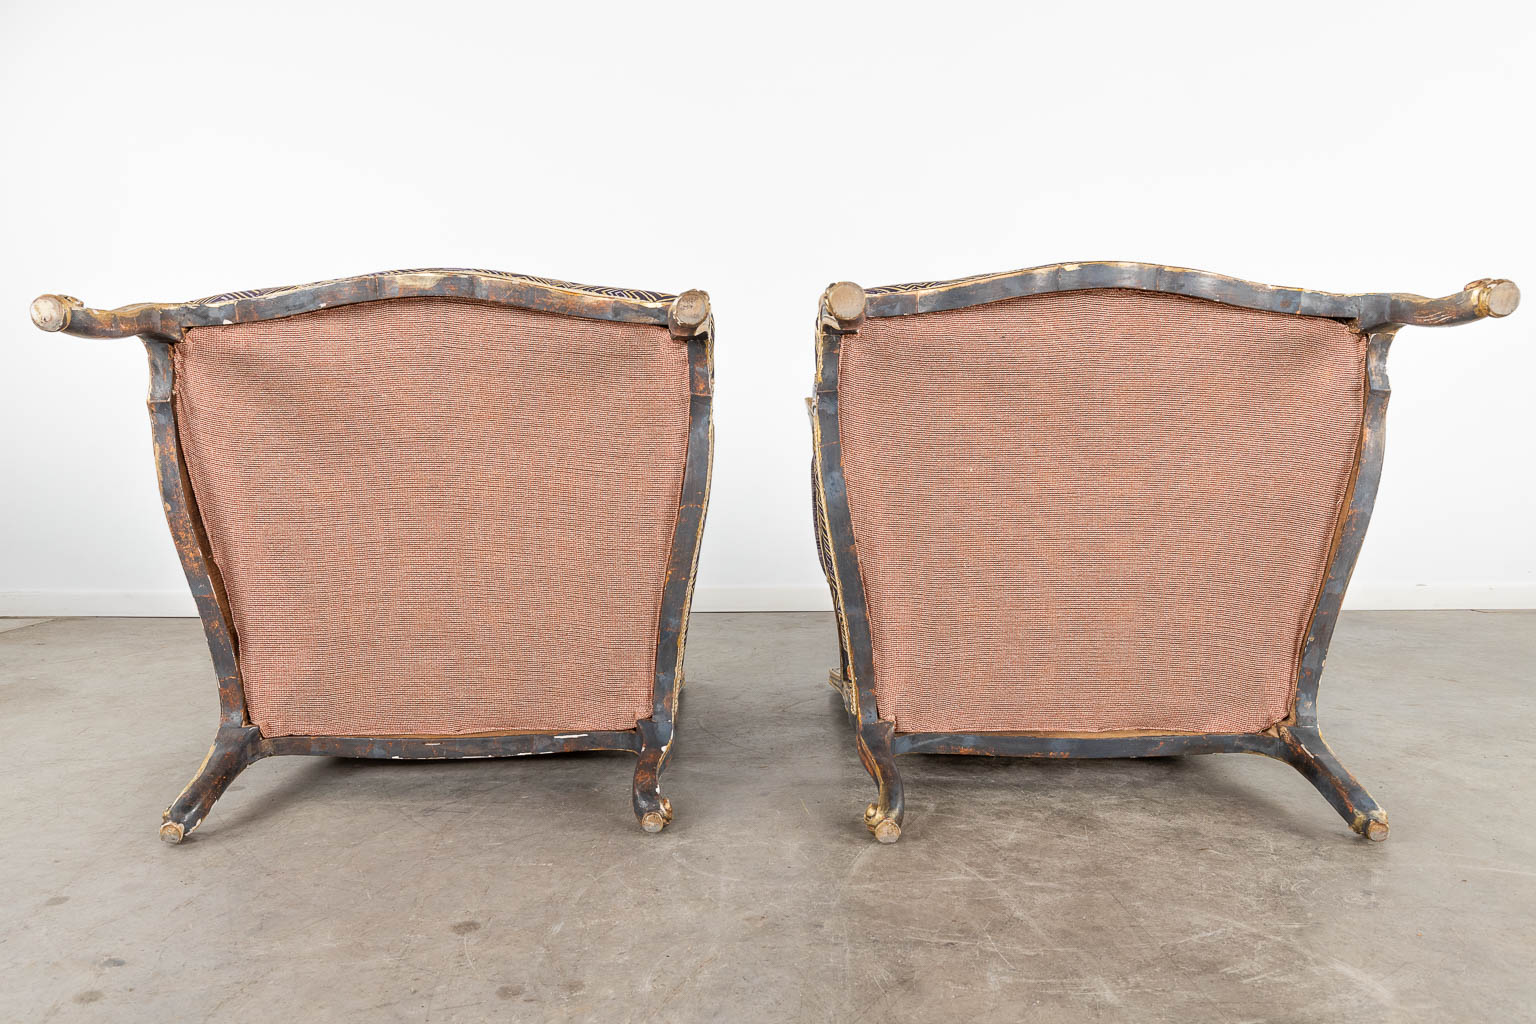 A pair of patinated Louis XV-style armchairs, fabric decorated with pheasants. (D:75 x W:75 x H:88 cm)